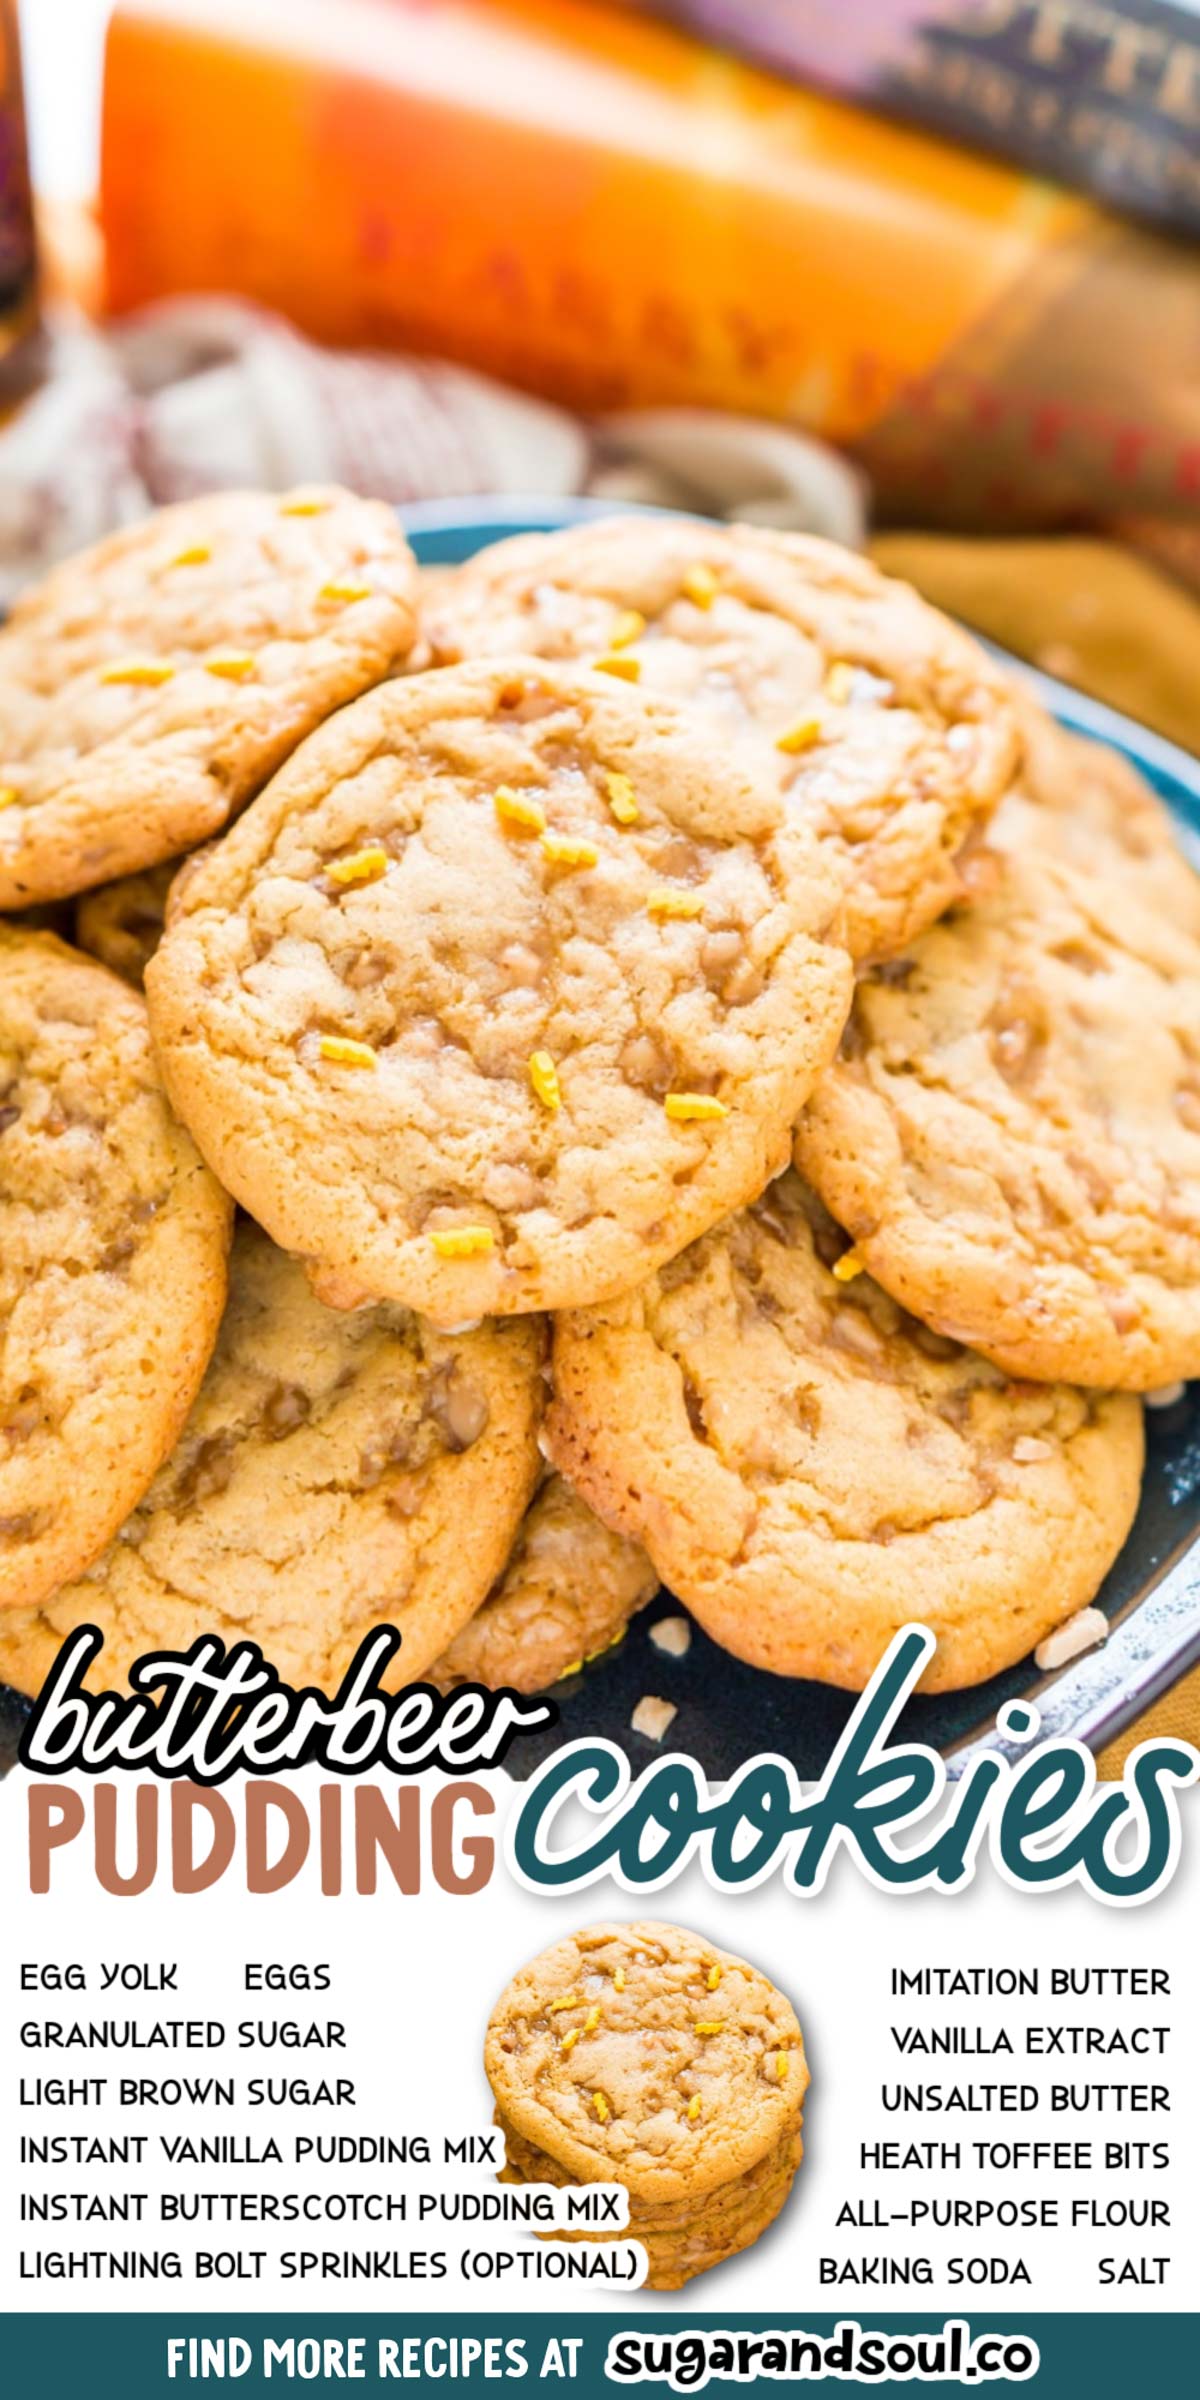 These Harry Potter inspired Butterbeer Pudding Cookies are a sweet old-fashioned blend of vanilla and butterscotch loaded up with toffee bits. Baked to perfection with a soft chewy center and lightly crisp edges, they won't last long! via @sugarandsoulco